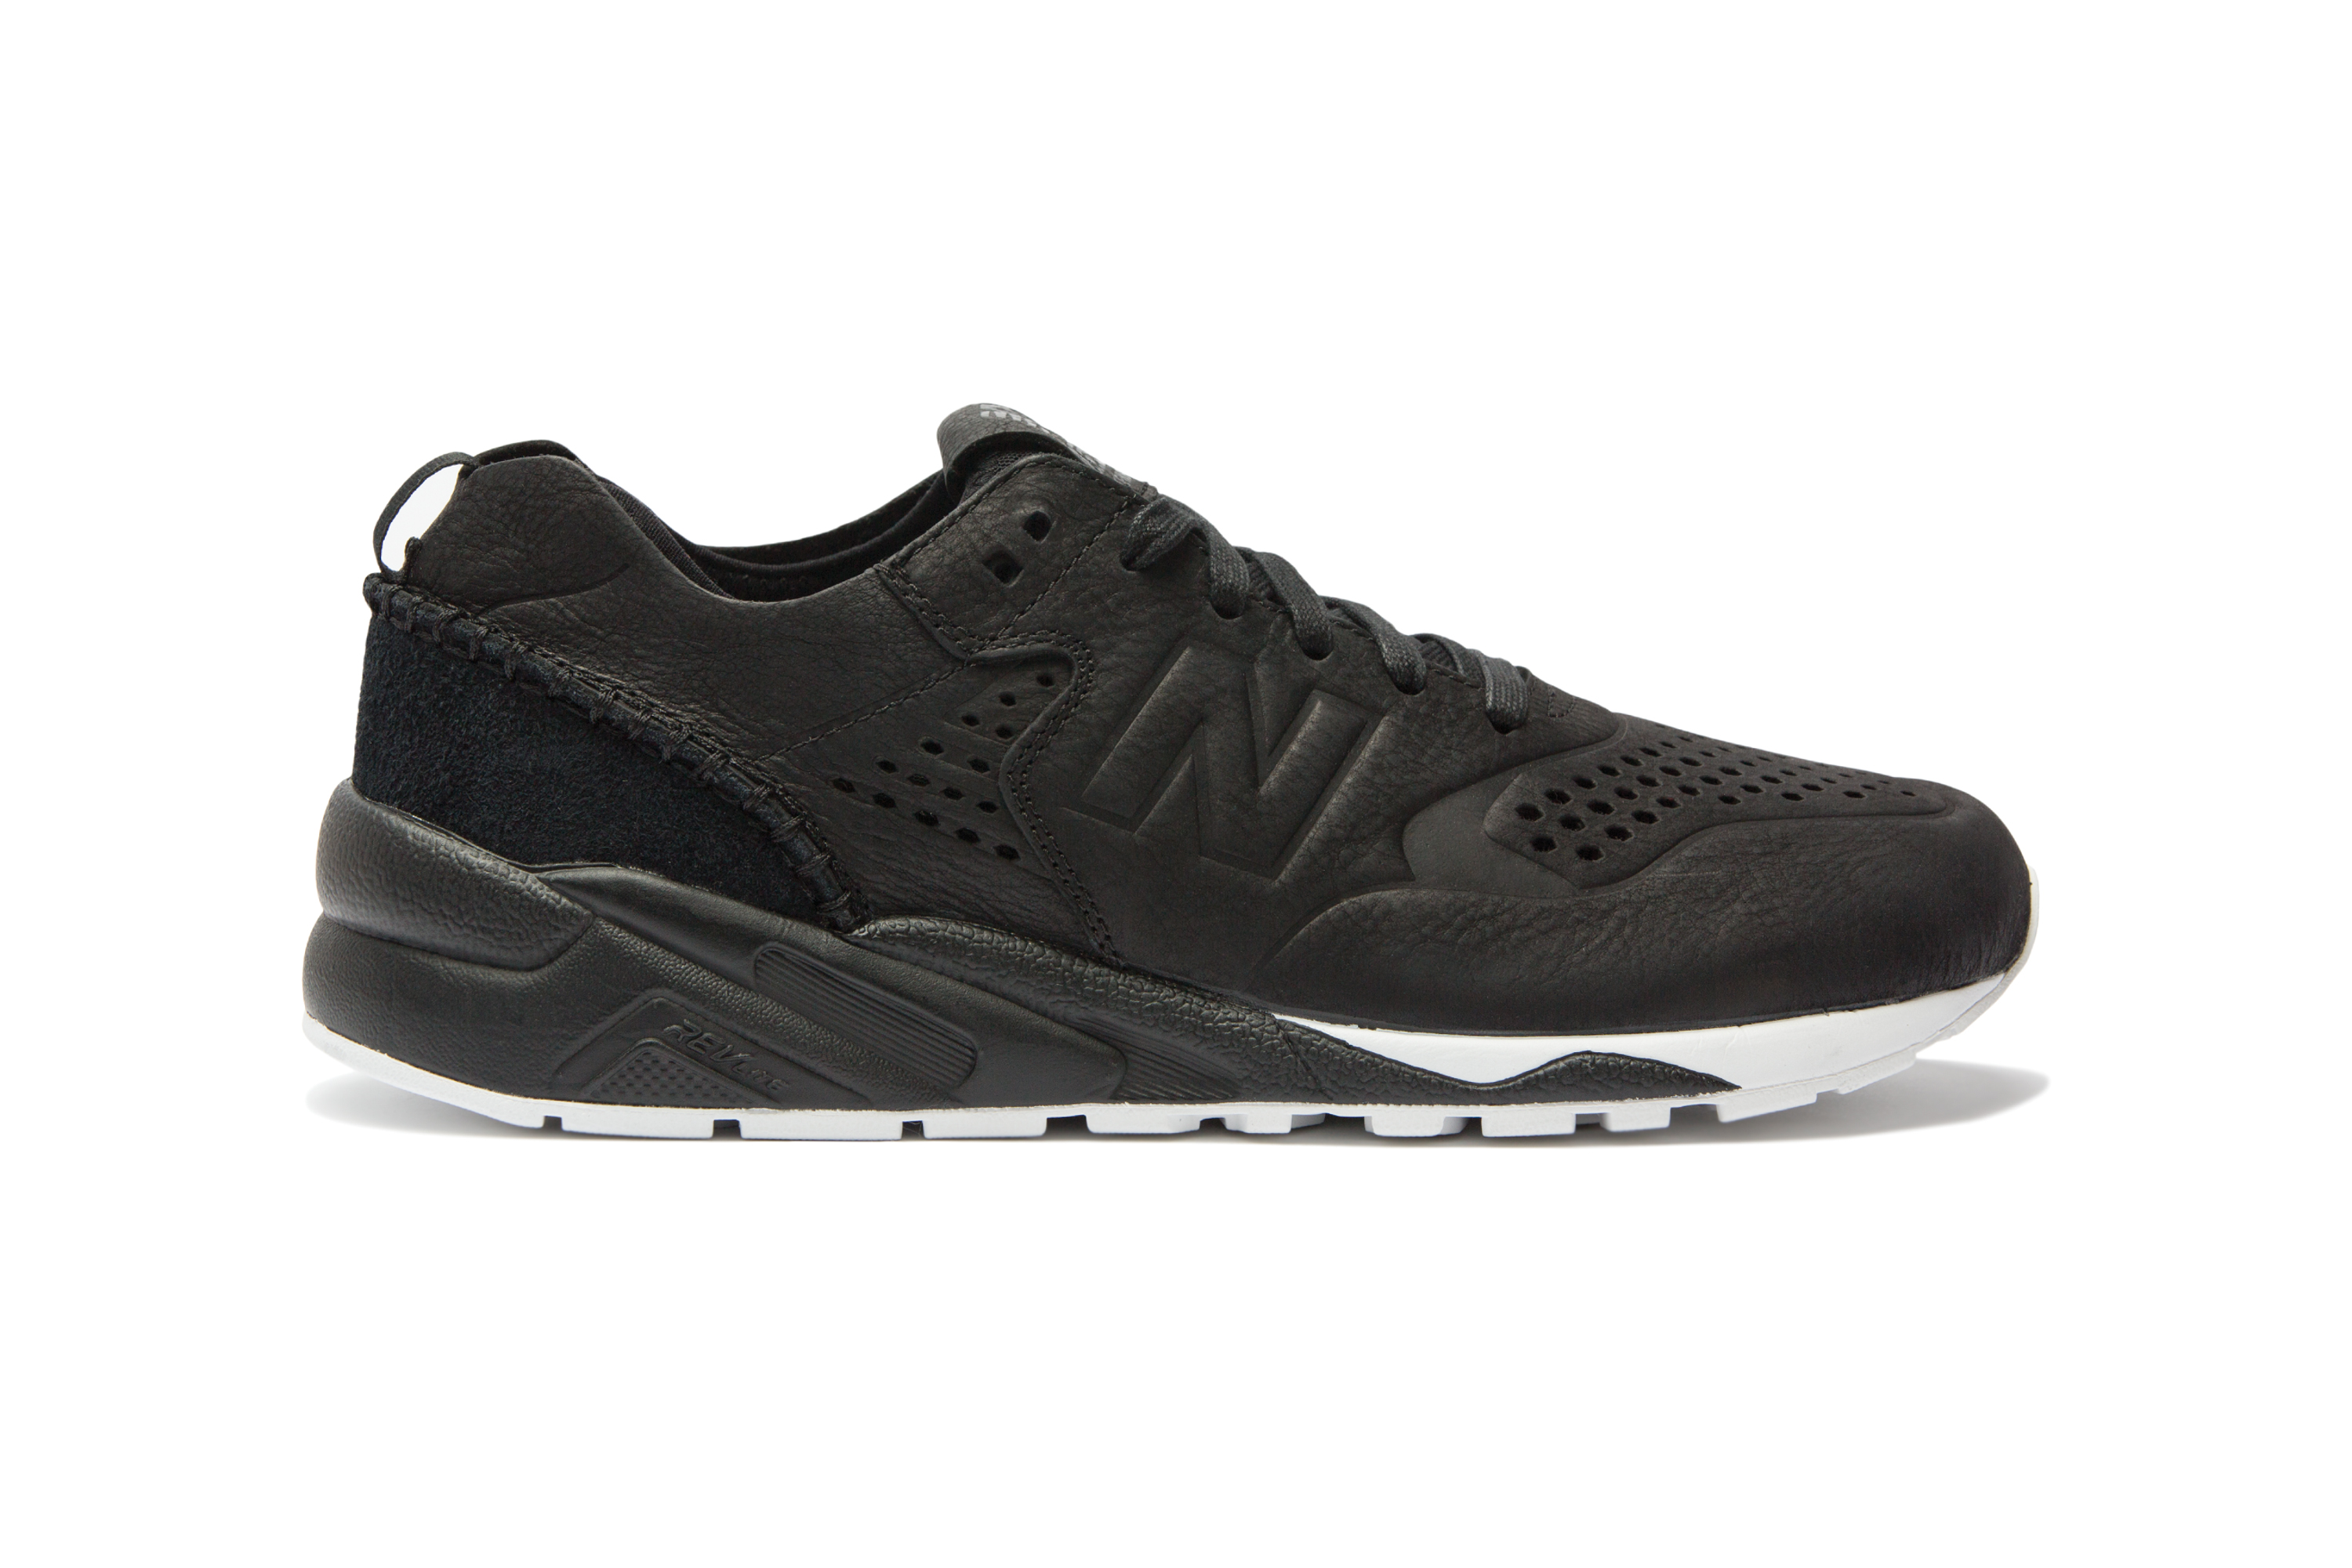 Vancouver\u0027s lifestyle brand wings+horns releases shoe collaboration with New  Balance